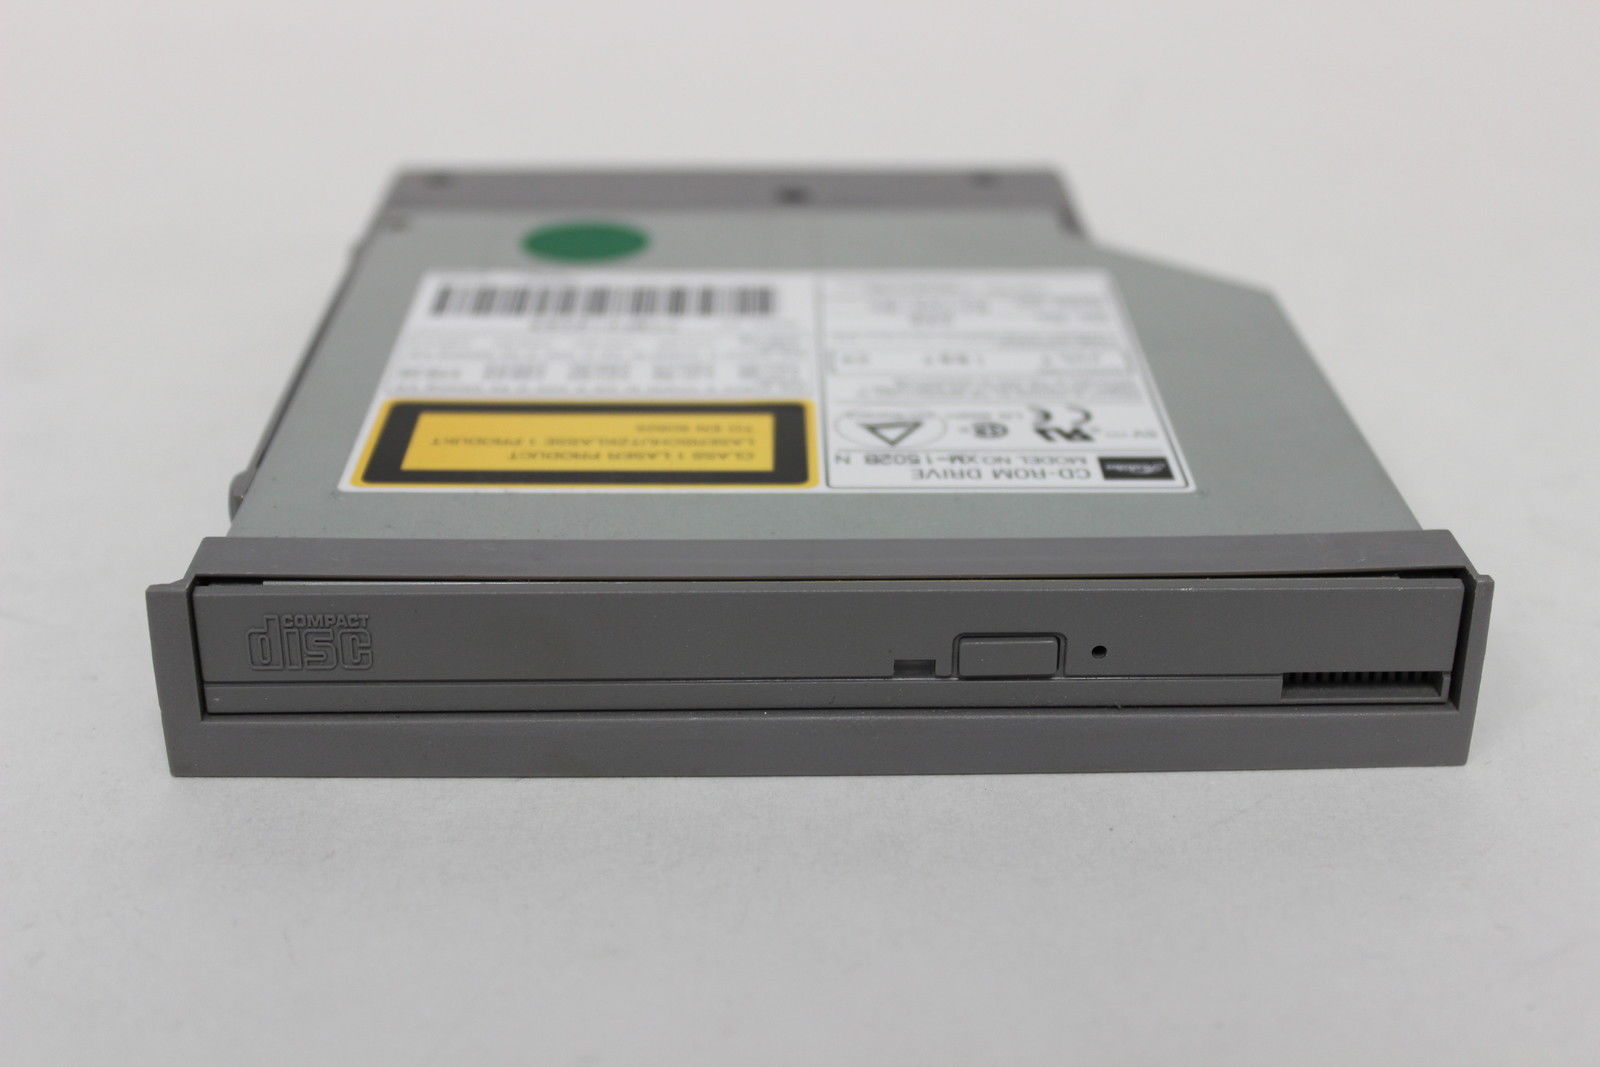 Sony CDU611 Cd-rom Drive Unit C for sale online 